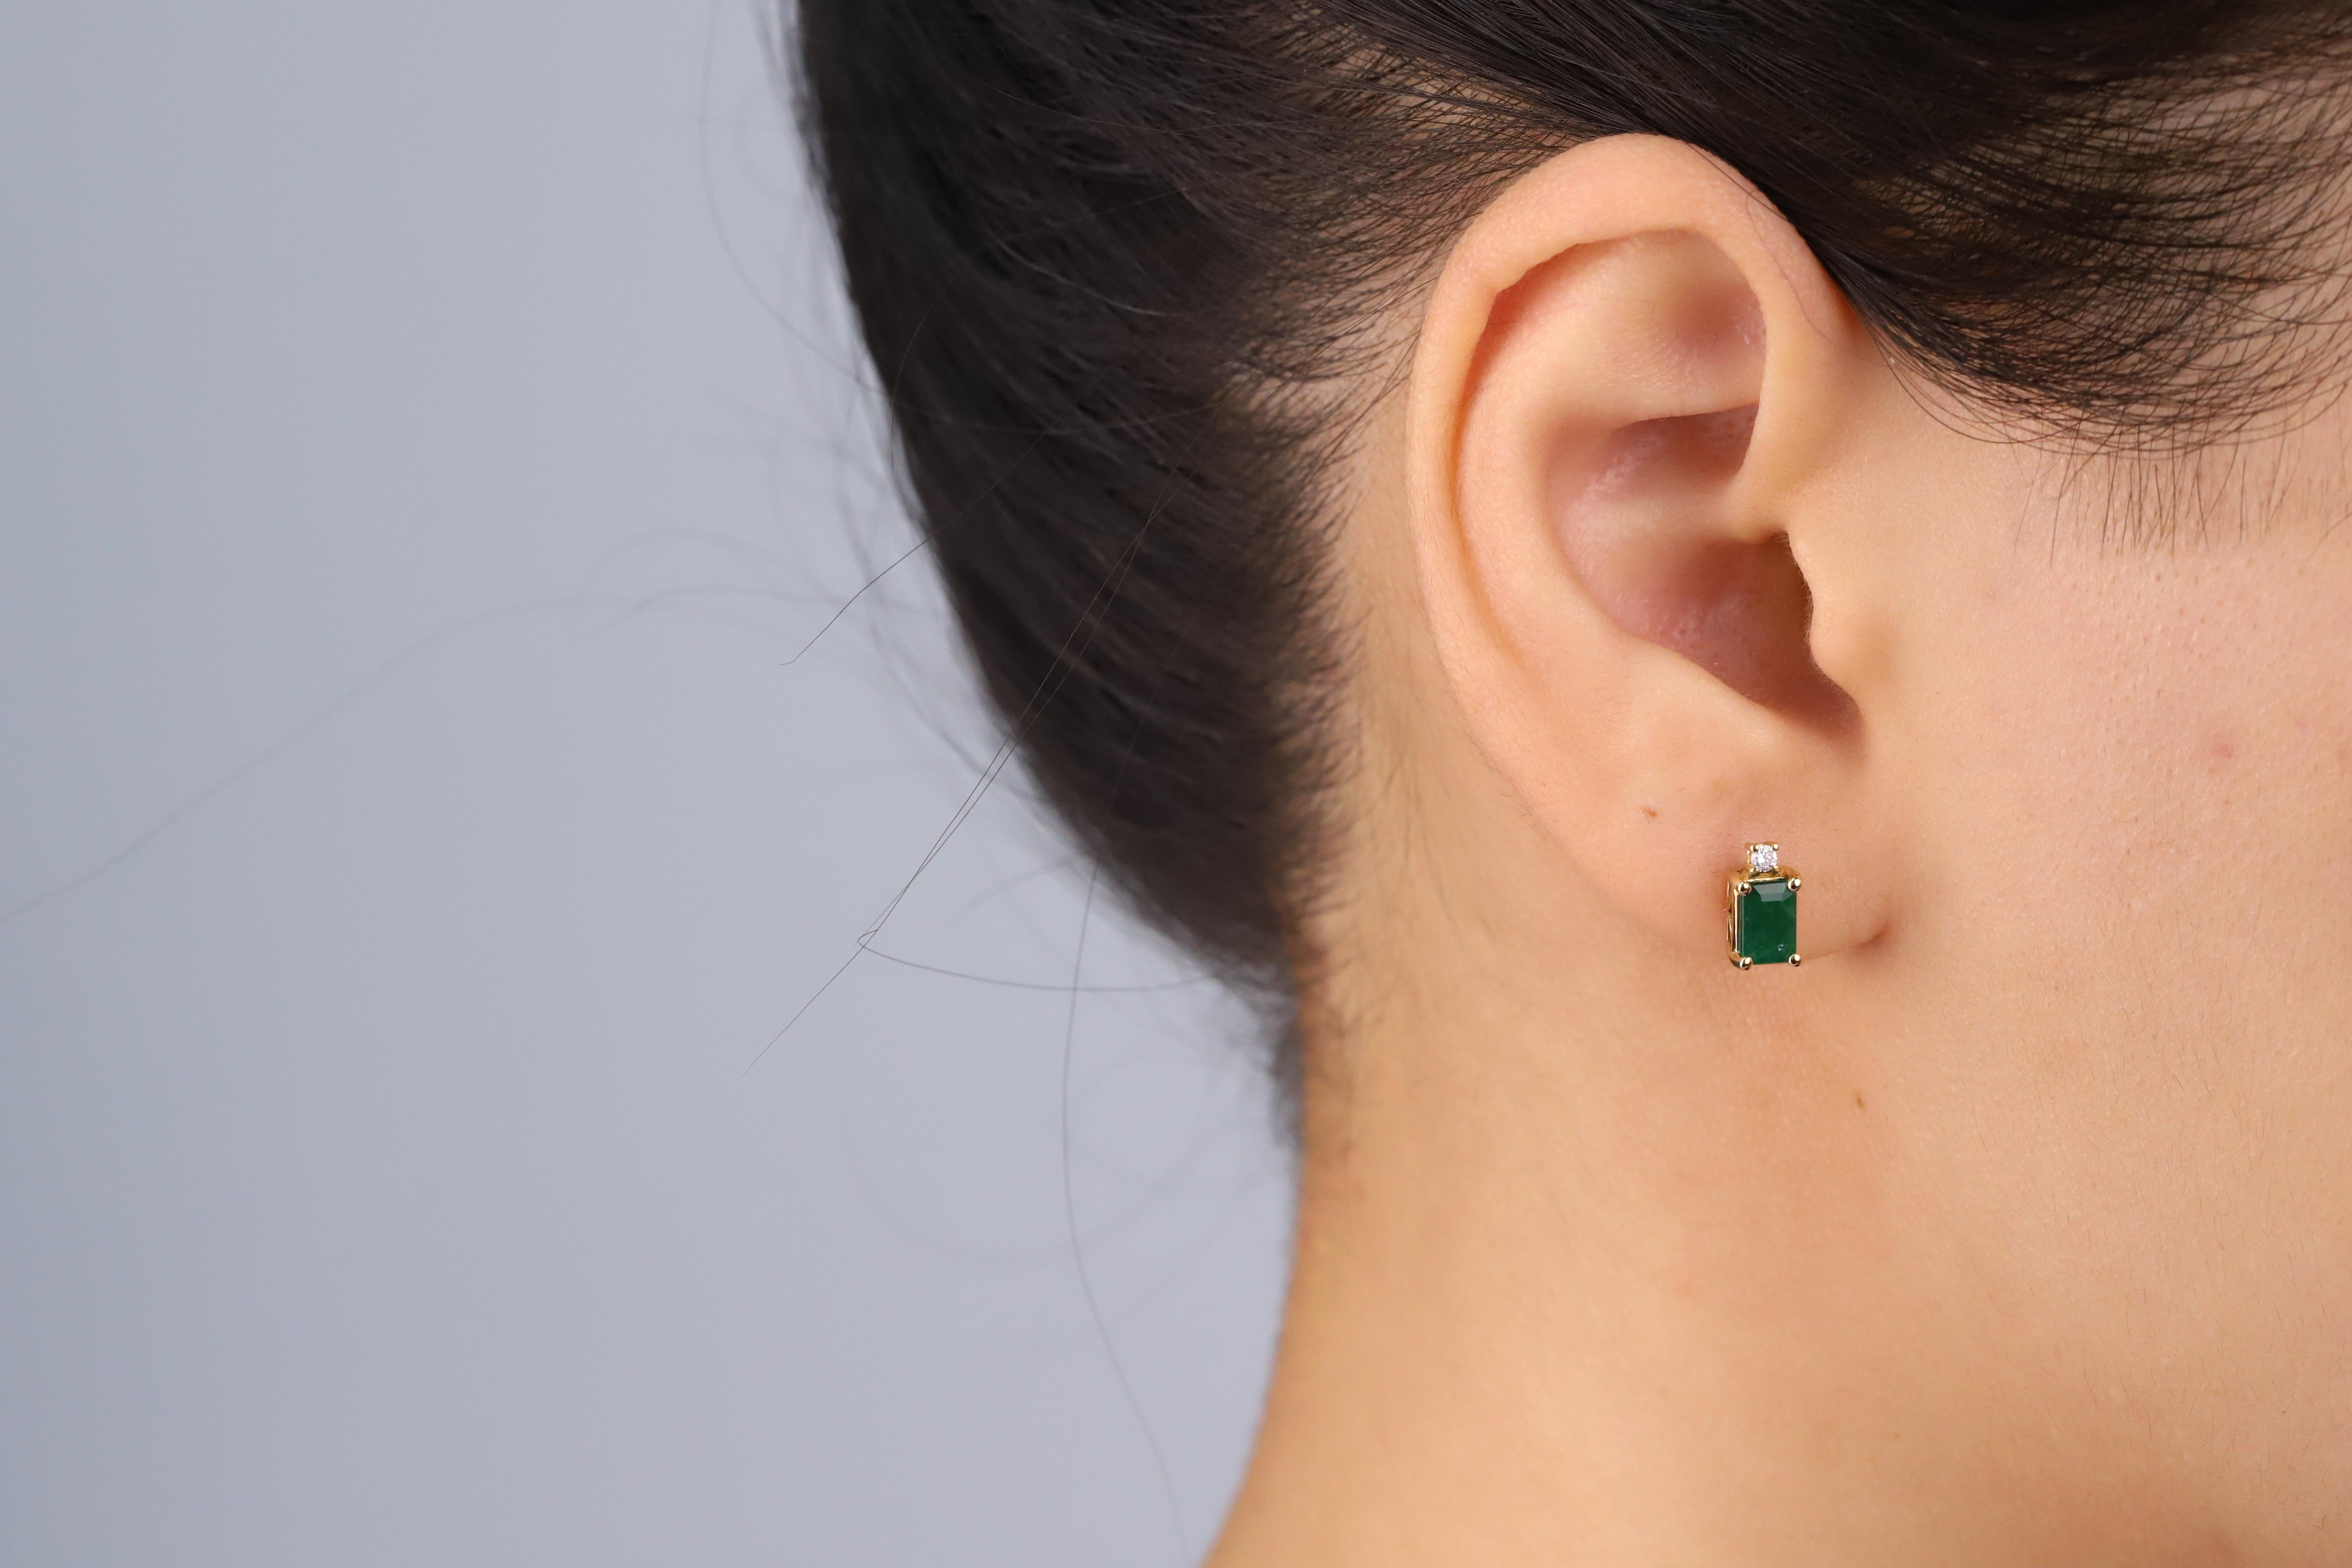 Decorate yourself in elegance with this Earring is crafted from 14K Yellow Gold by Gin & Grace Earring. This Earring is made up of 4X6 Emerald-Shape prong setting Emerald (2 pcs) 1.13 Carat and Round-Cut prong setting Diamond (2 pcs) 0.05 Carat.